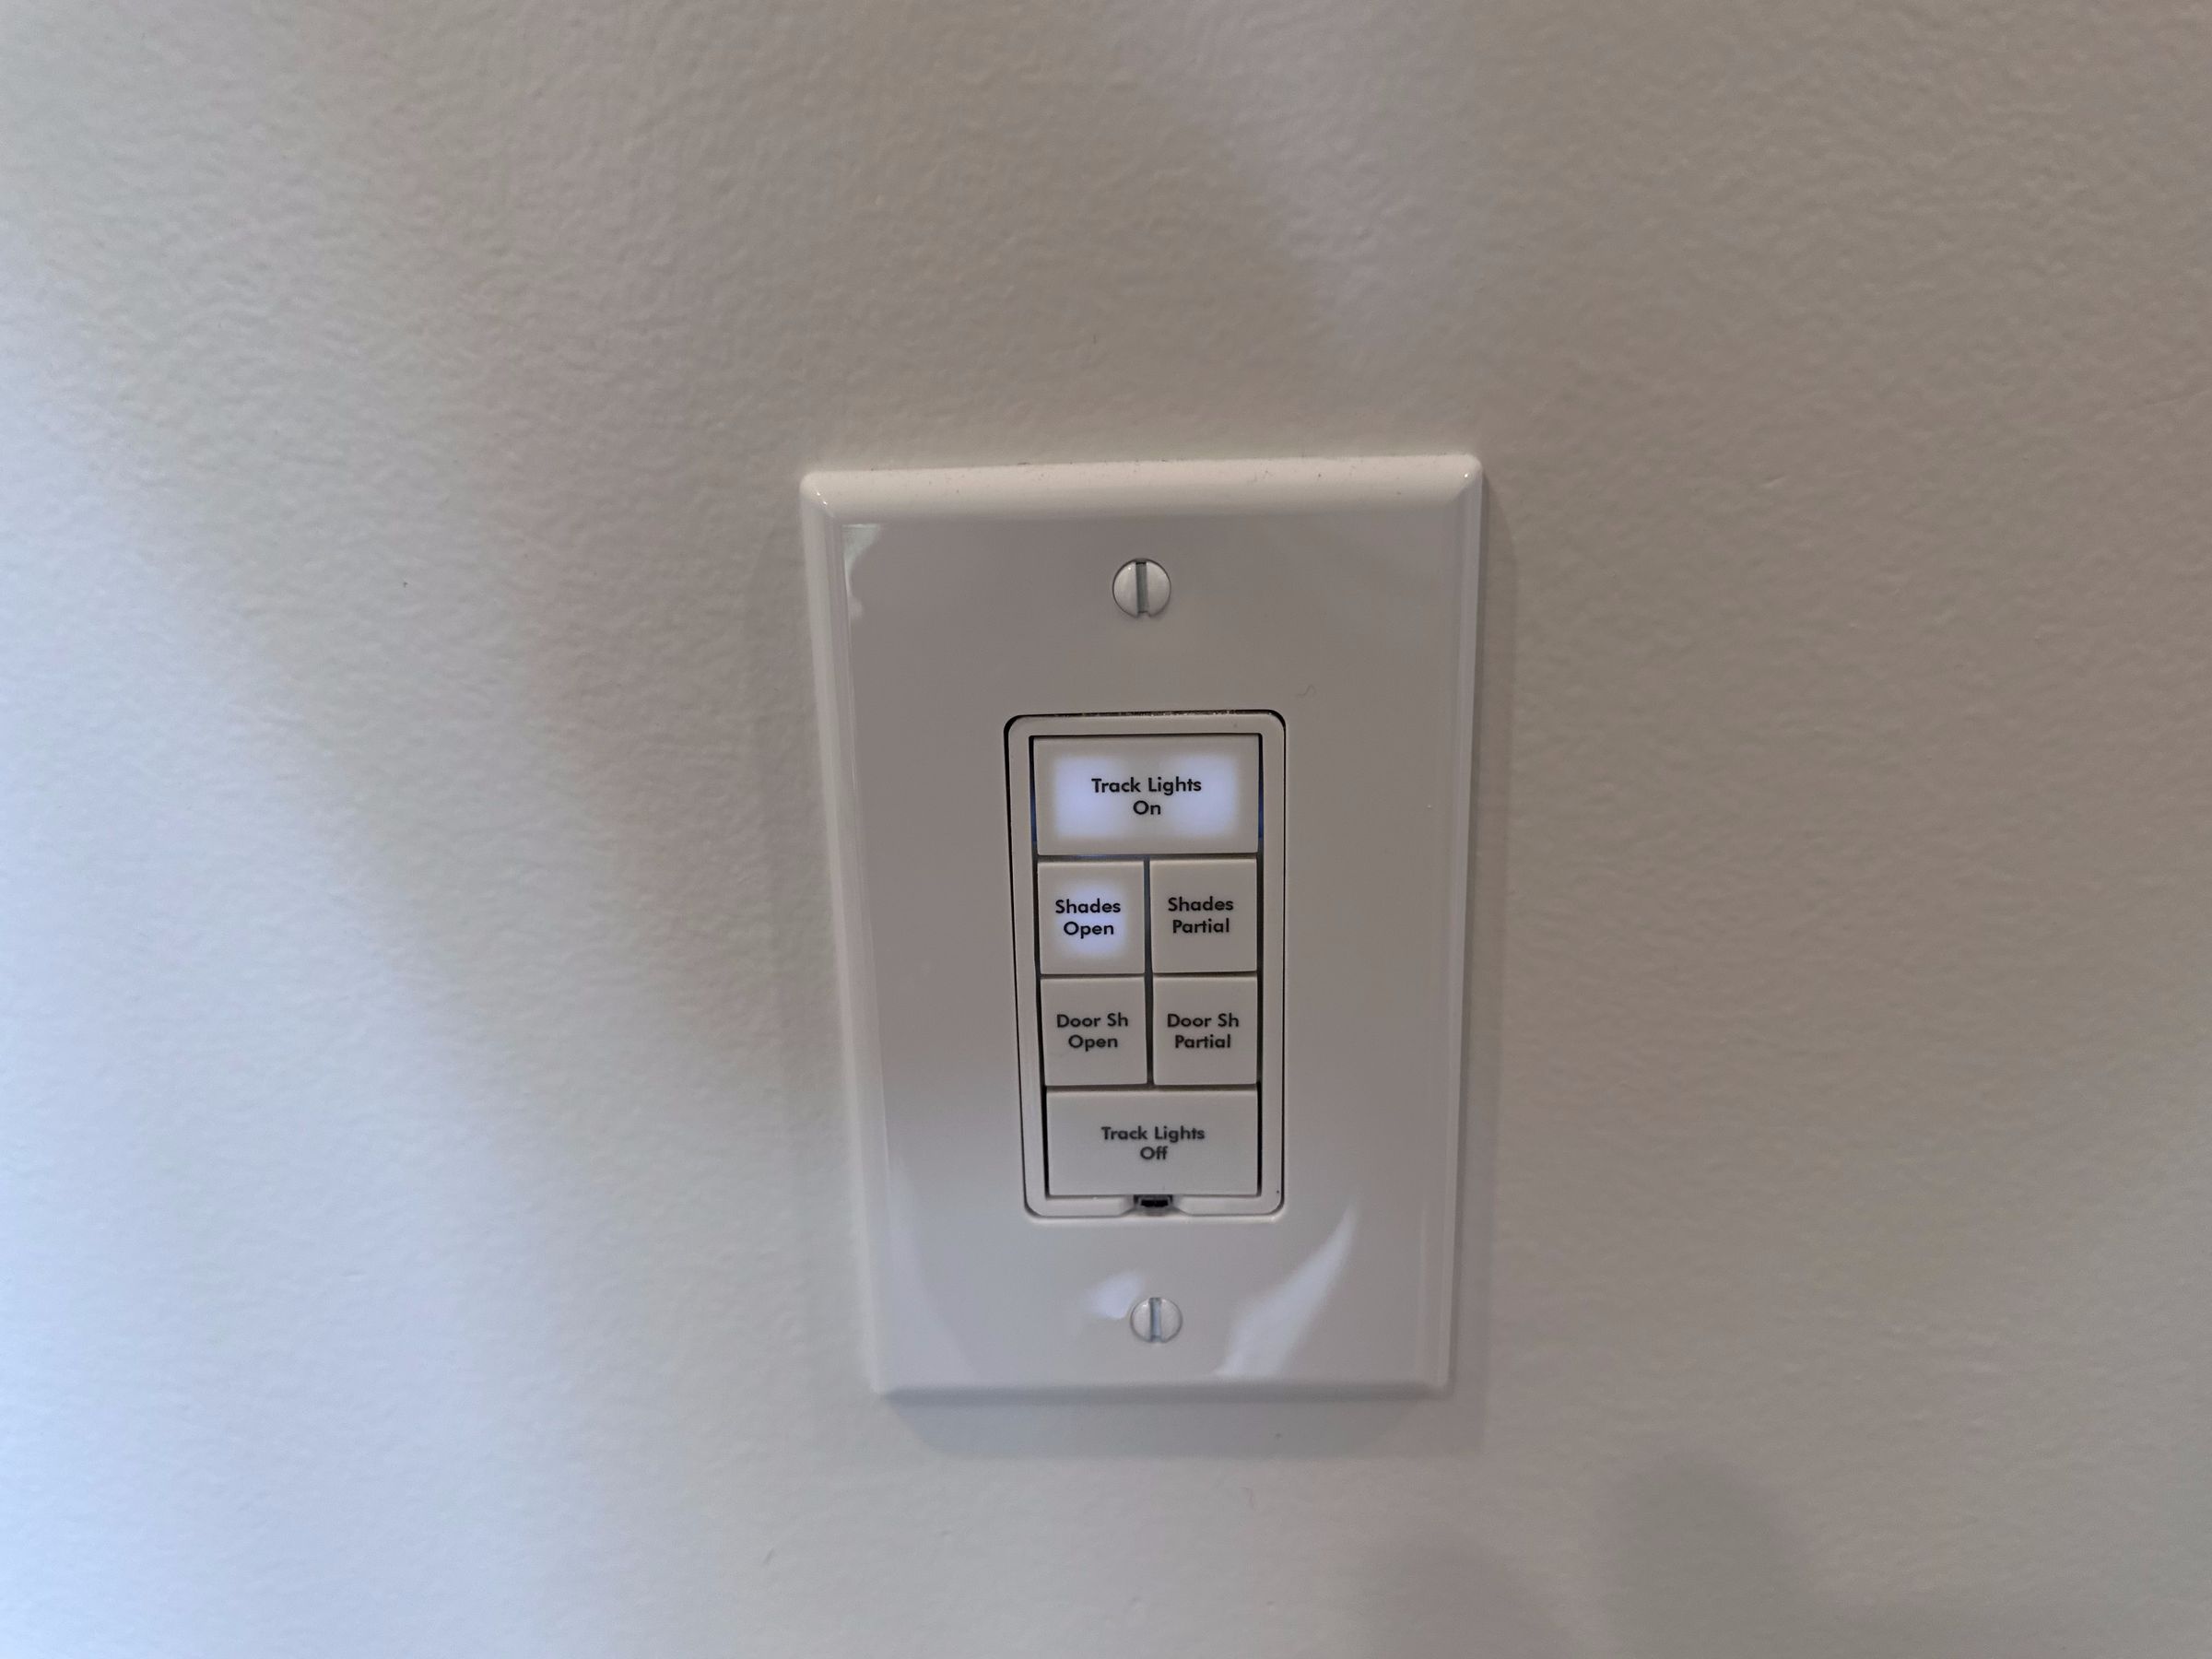 An image of a multi-button panel for a smart home.